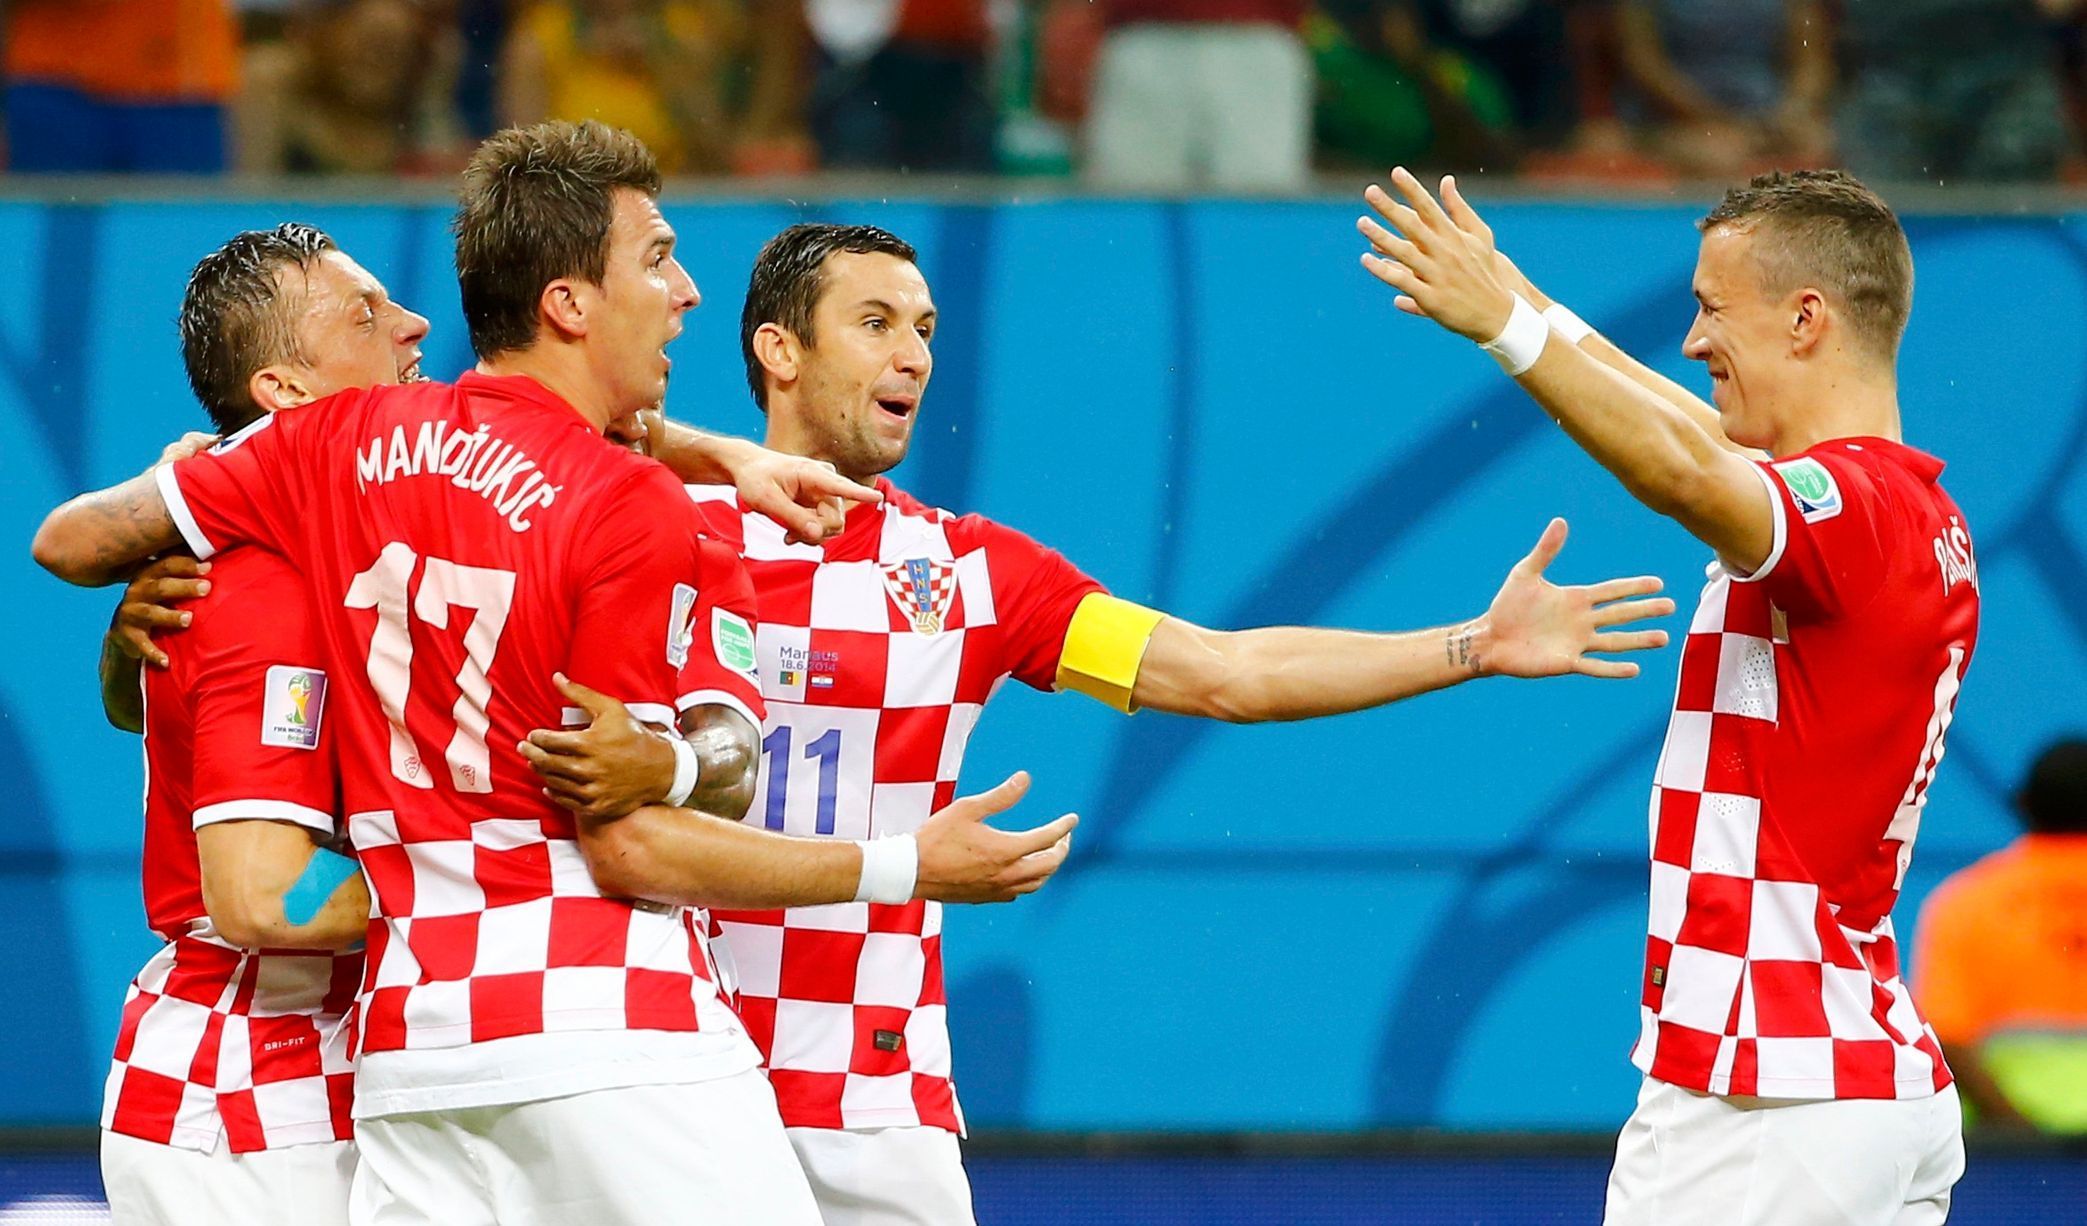 Croatia's Olic celebrates his goal against Cameroon with his teammates during their 2014 World Cup Group A soccer match at the Amazonia arena in Manaus